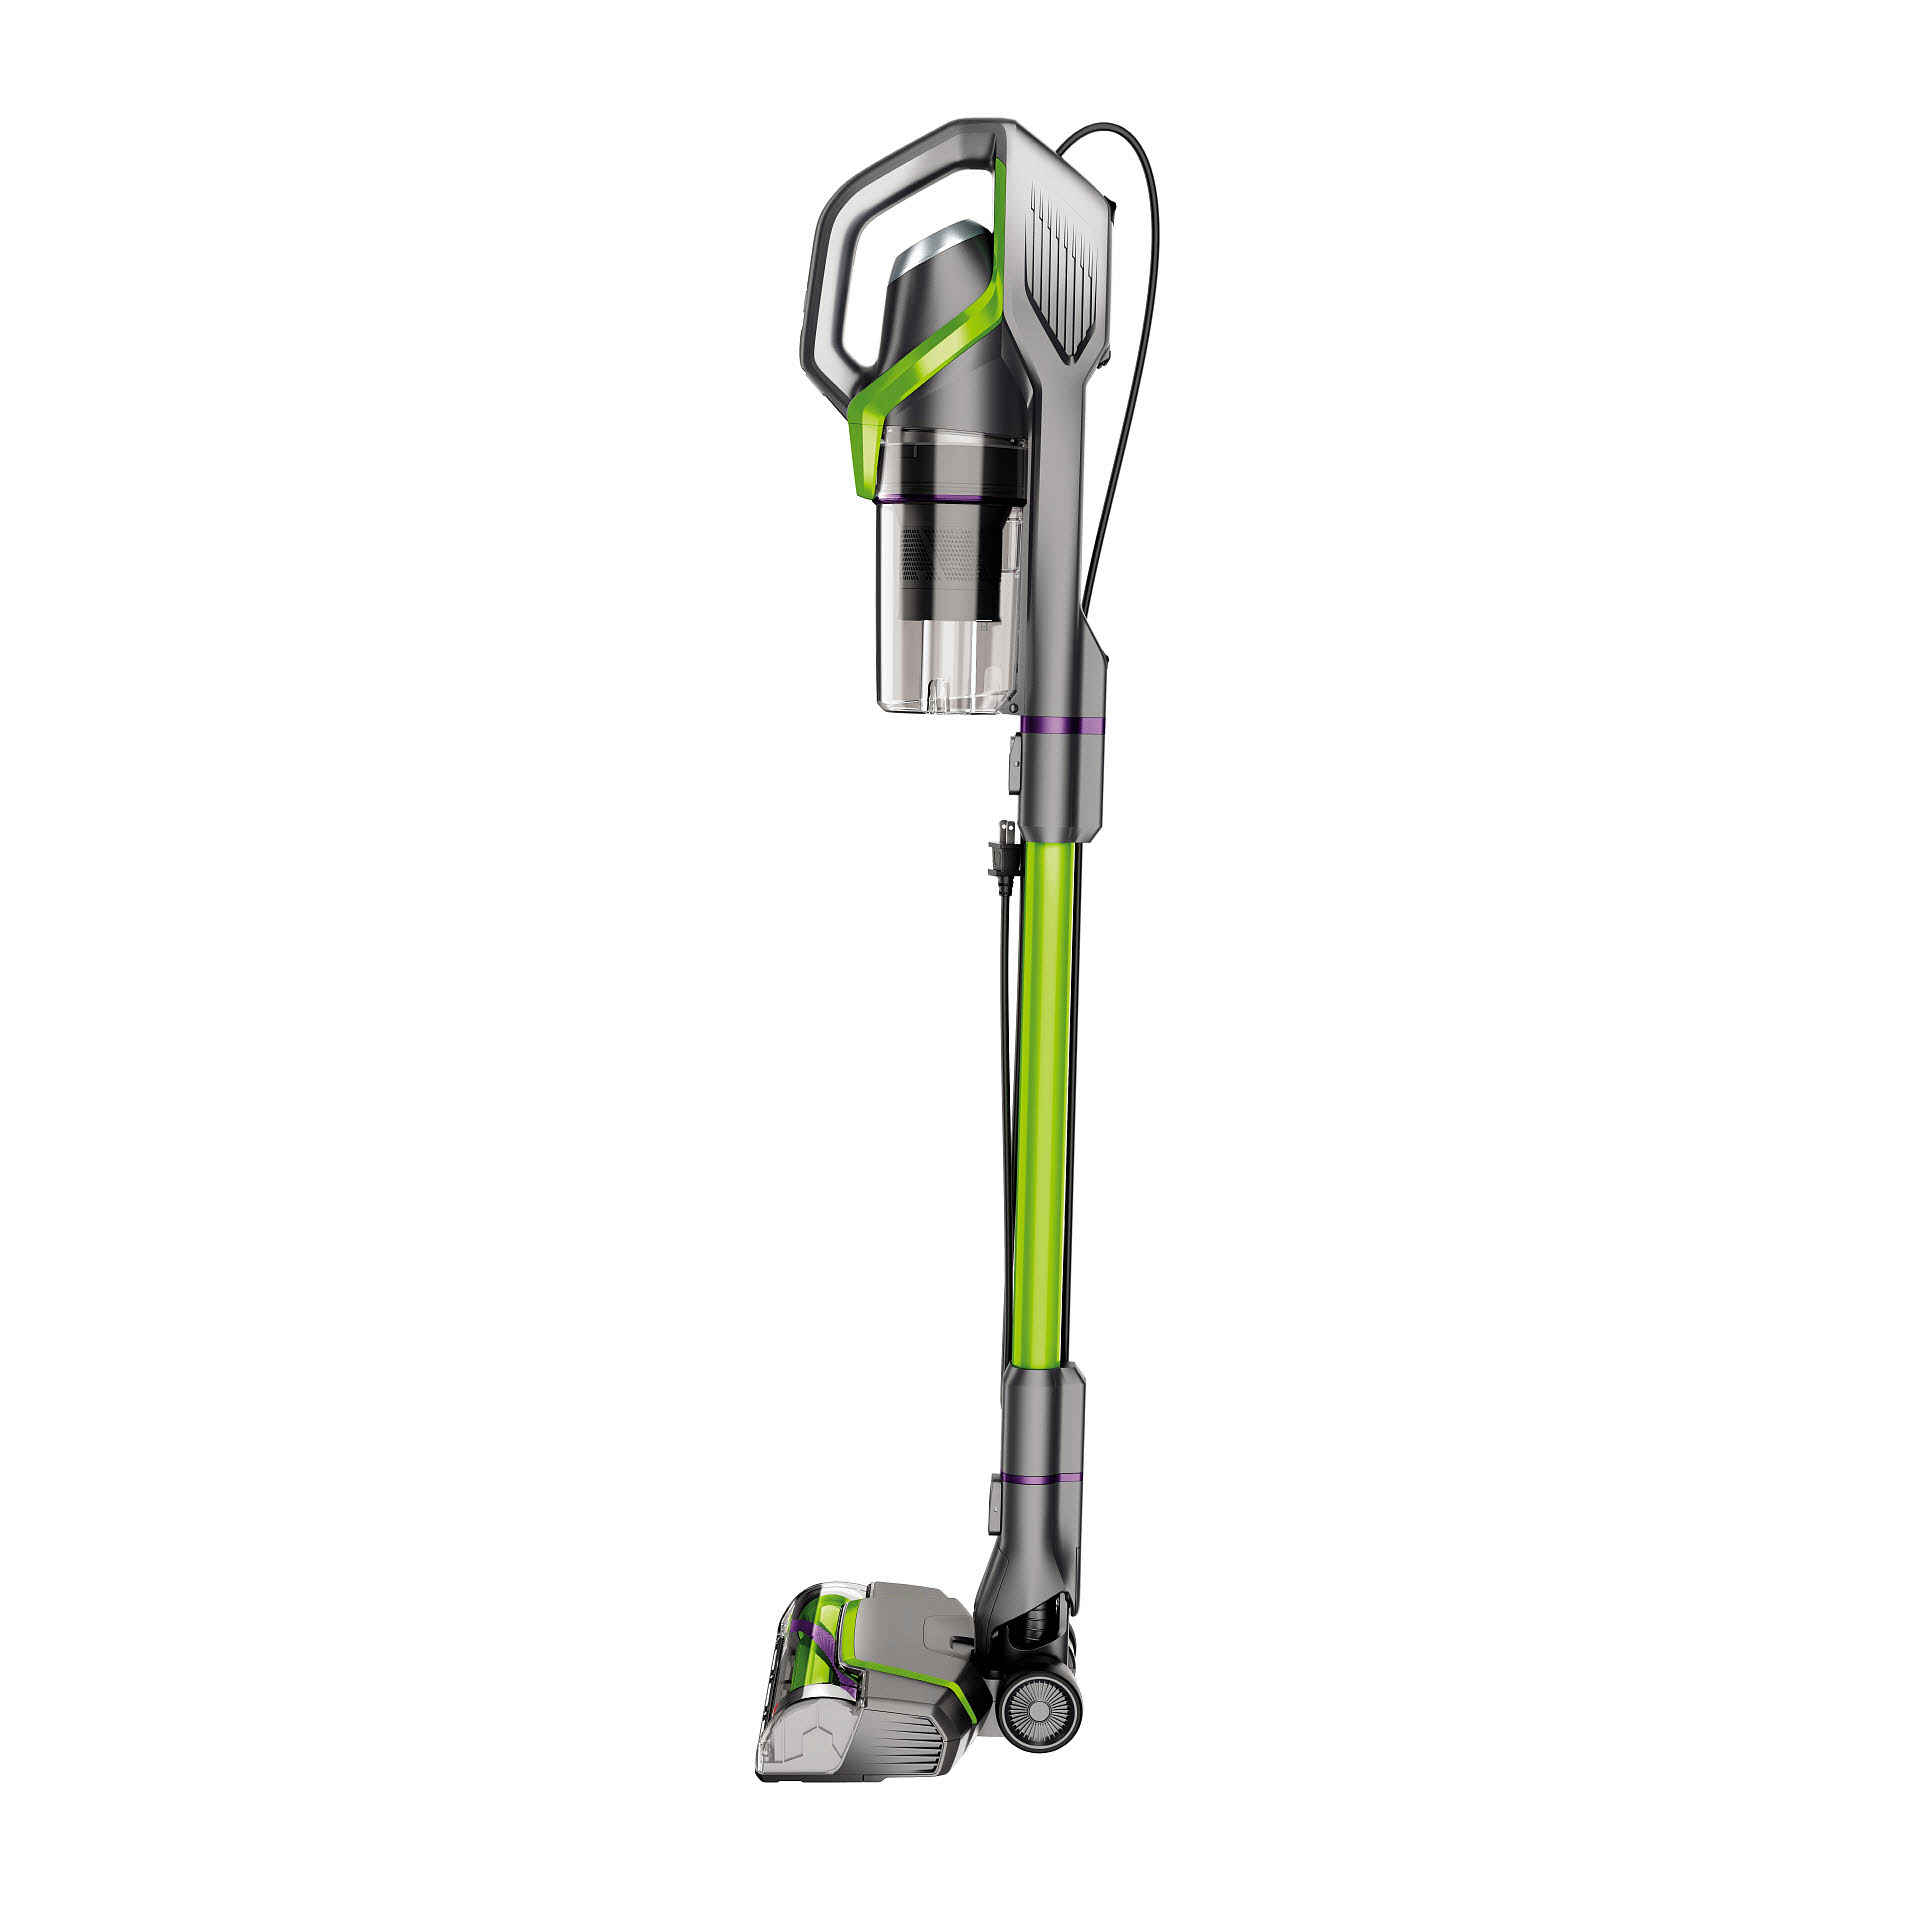 Where to buy the Bissell Pet Hair Eraser Slim Corded Vacuum Cleaner 2897 at the best price?